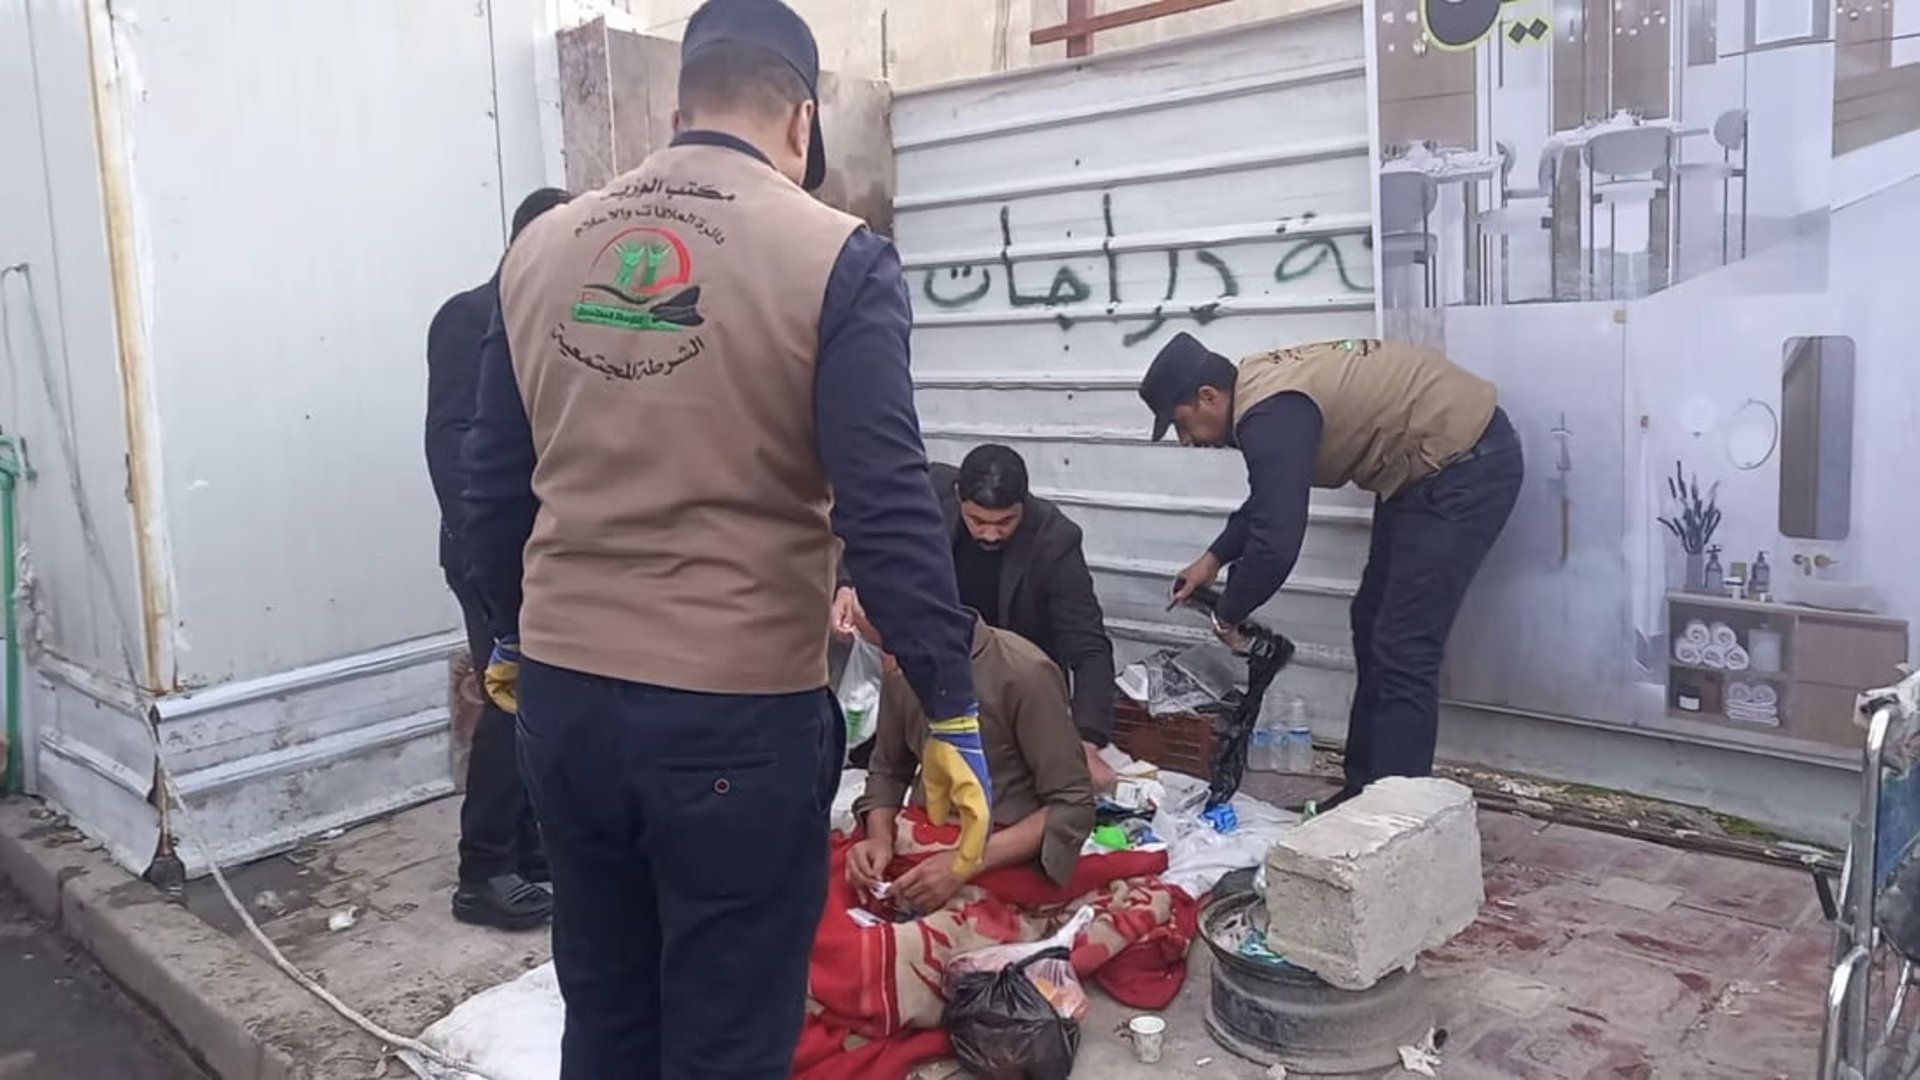 Karbala police reunite elderly man with family in Mosul after years lost